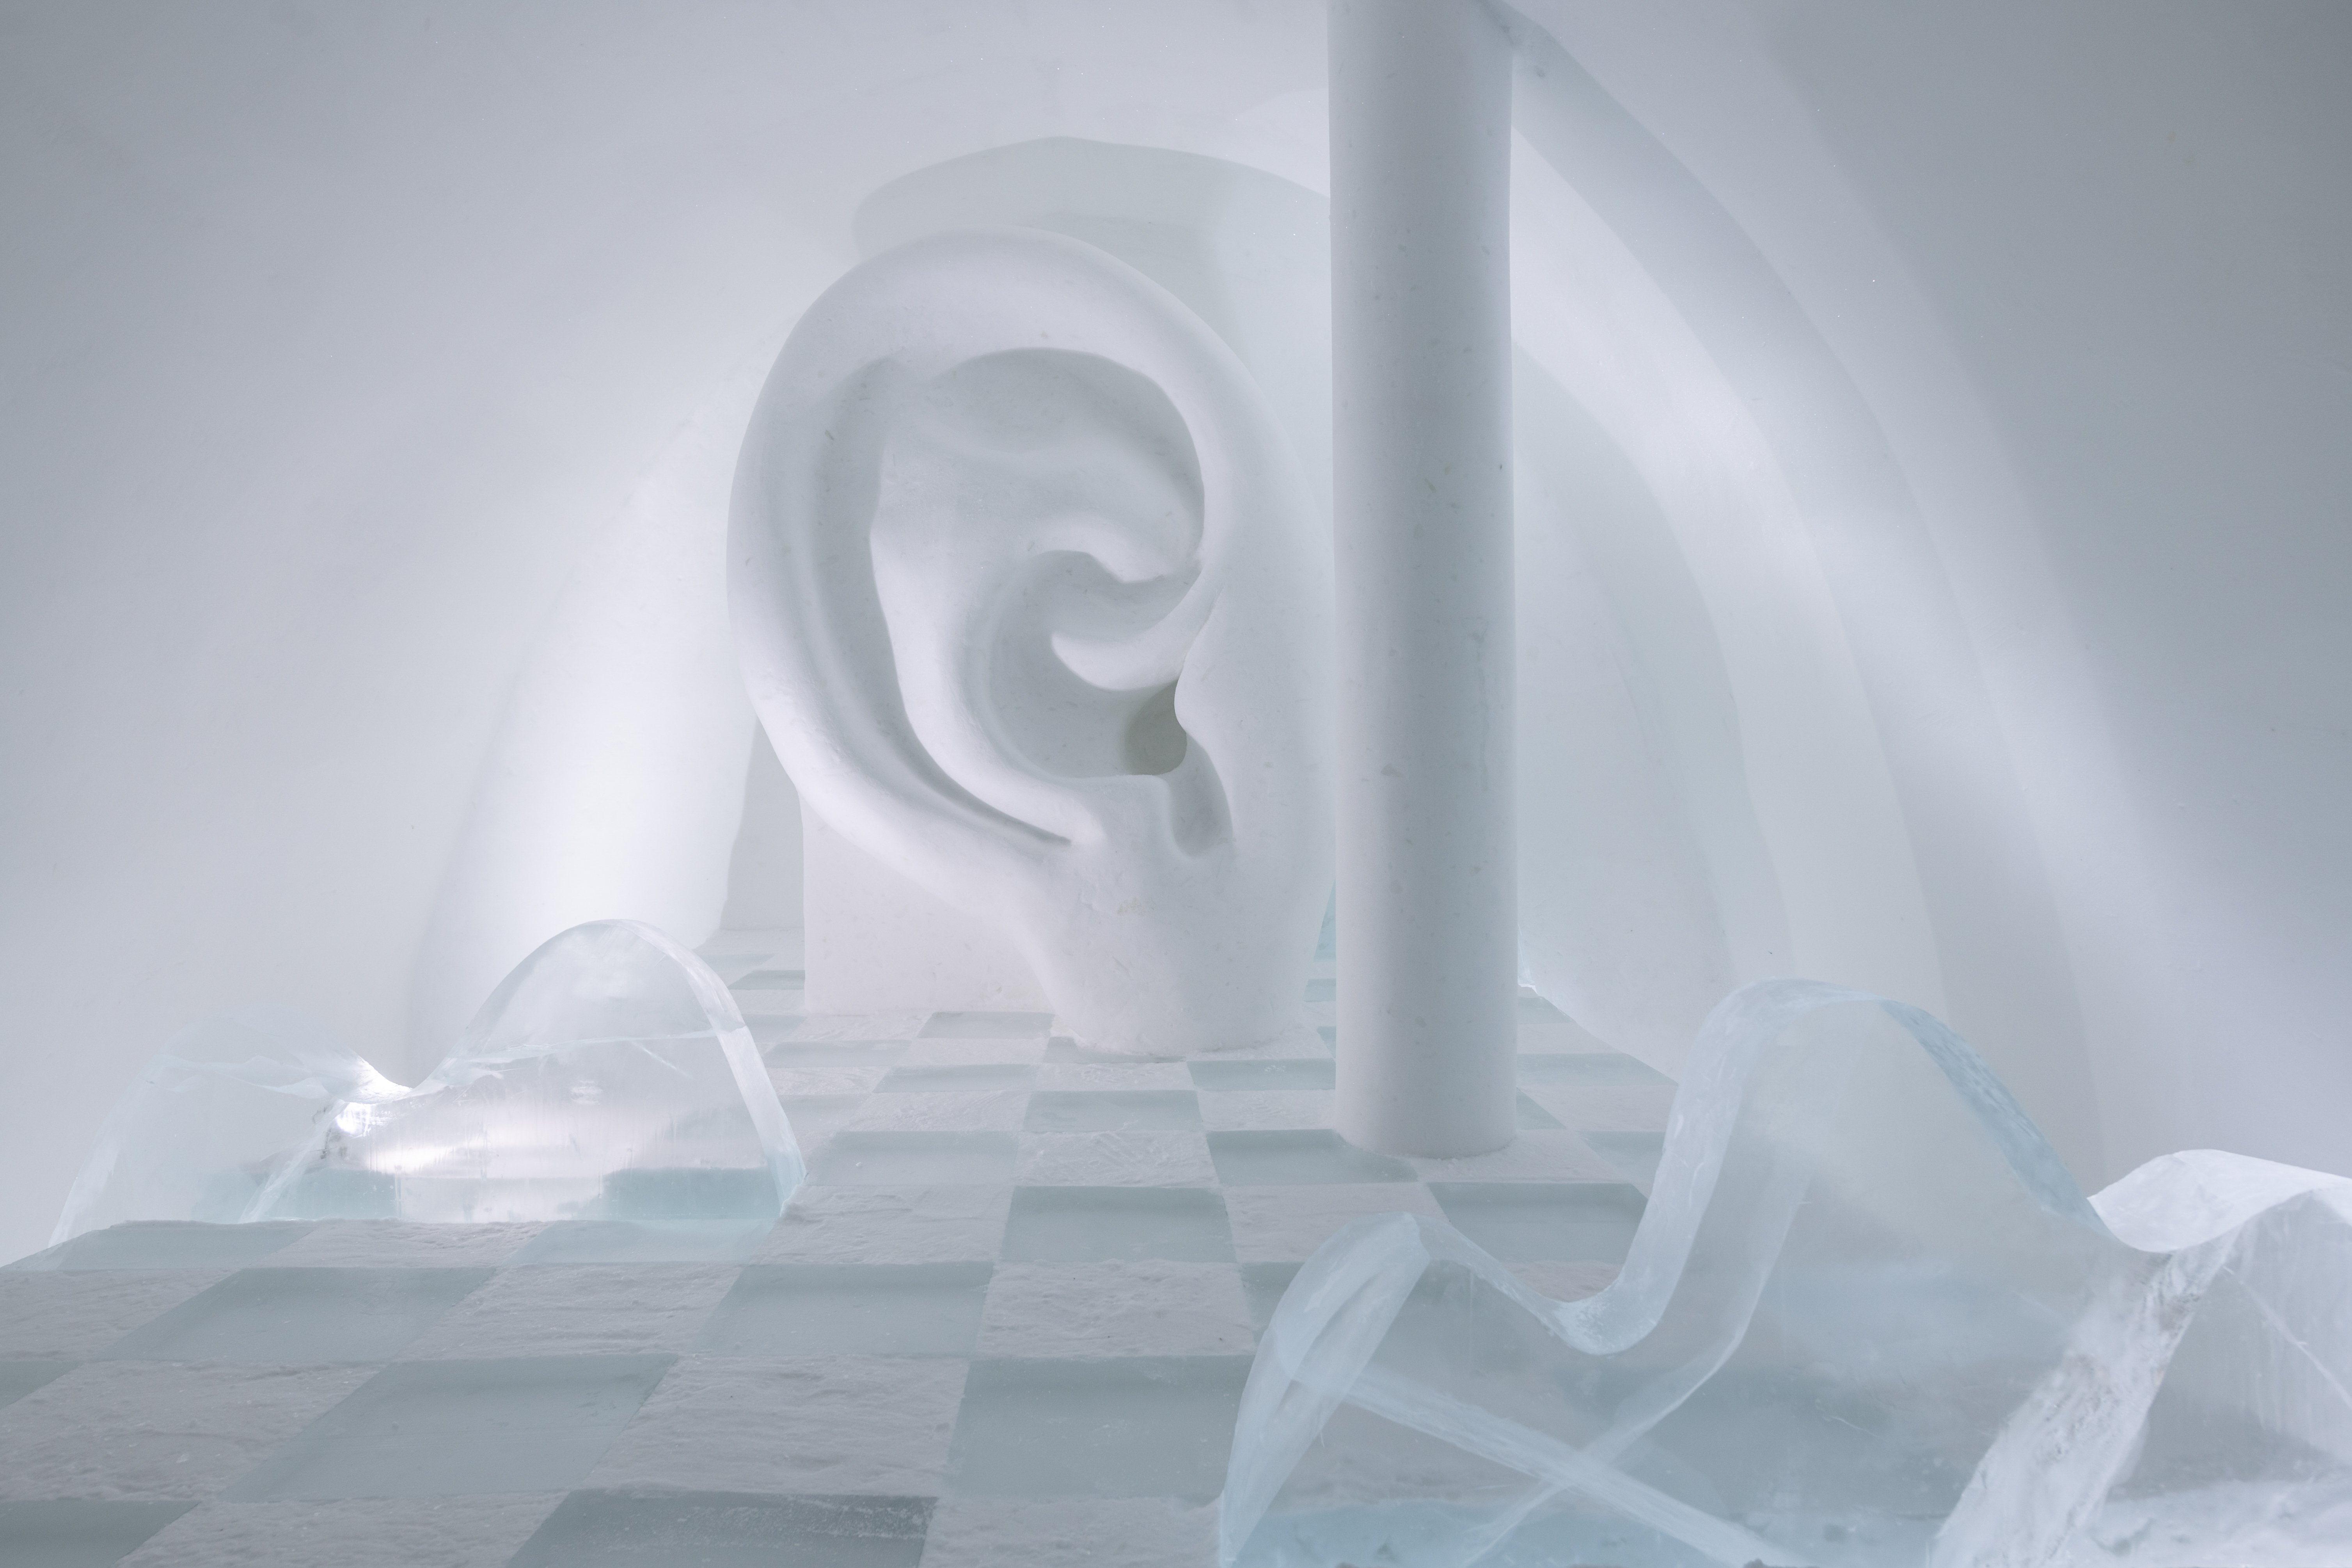 OBSCURA, deluxe art suite by Lukas Petko. ICEHOTEL 34, photo by - Asaf Kliger-3.jpg